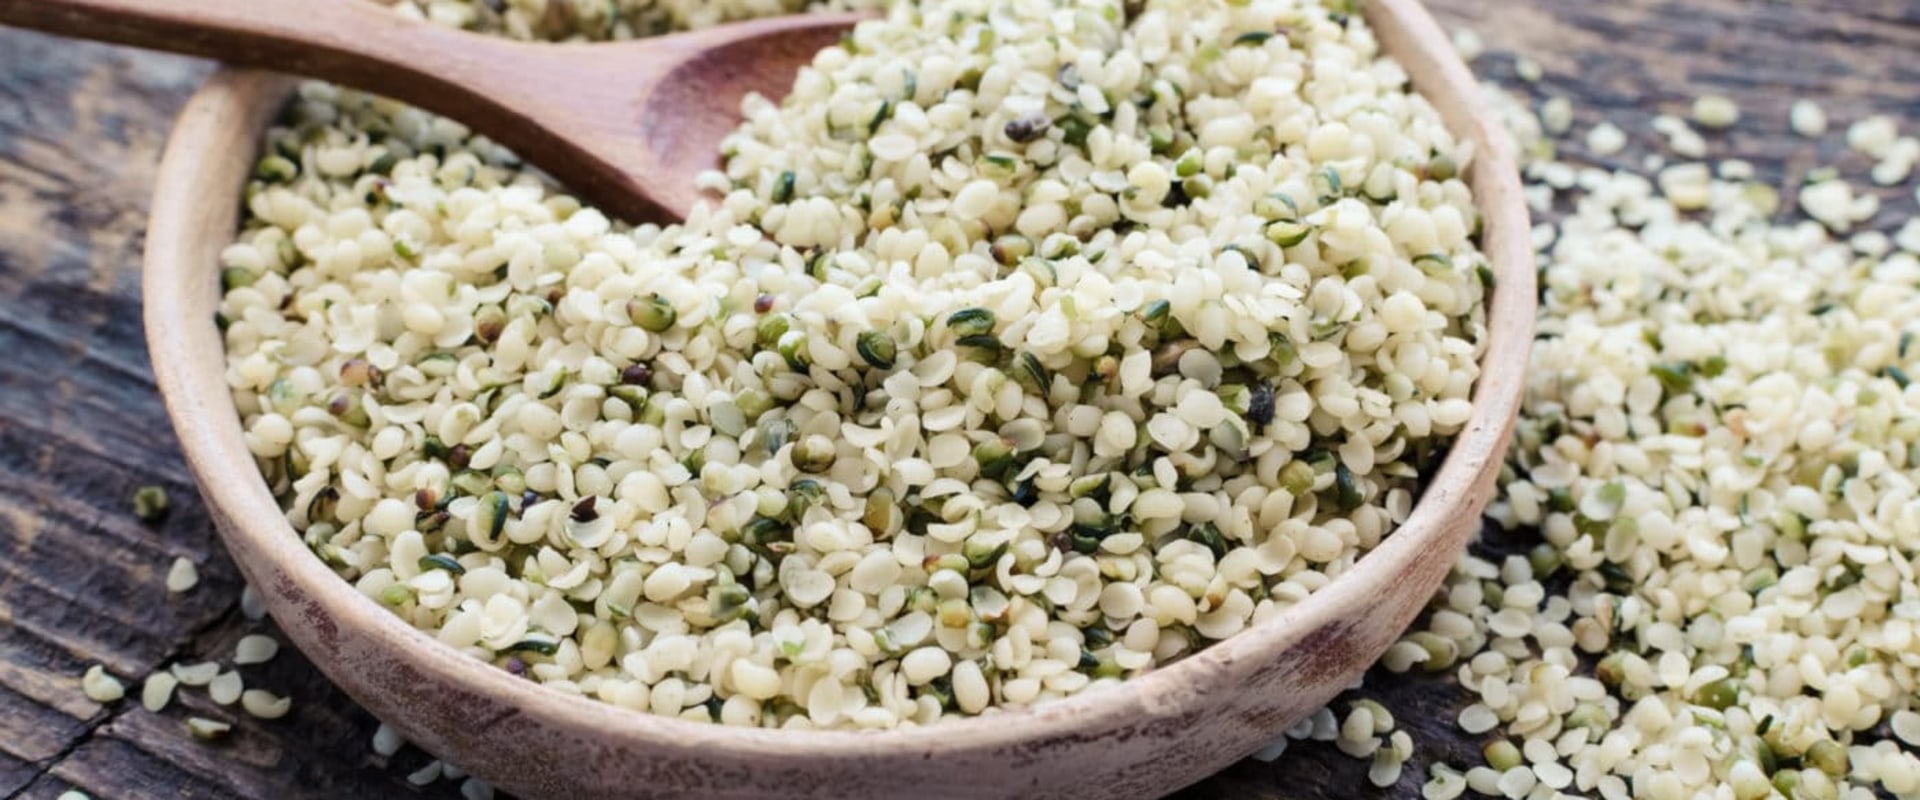 How to Tell When Hemp Hearts Have Gone Bad